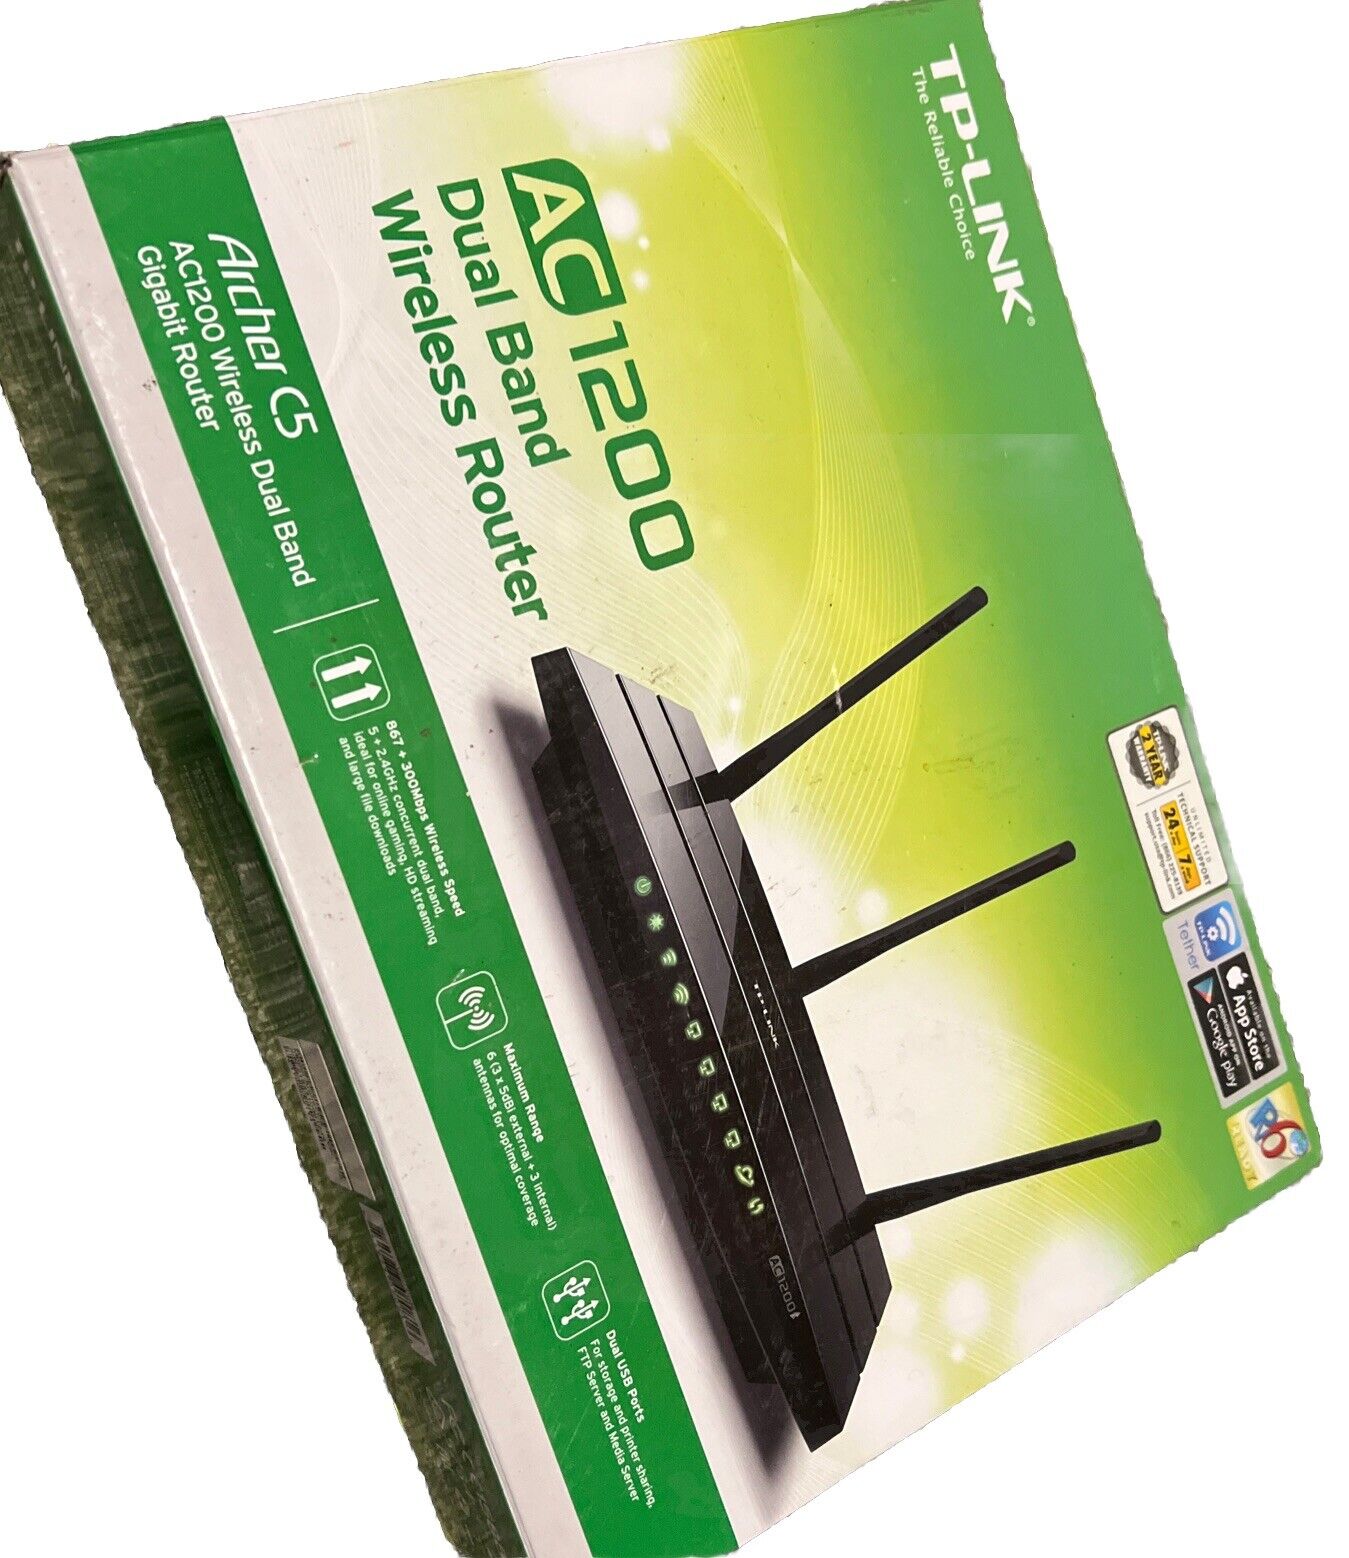 TP-Link  Dual-Band Wireless AC1200 WiFi Router   Brand New